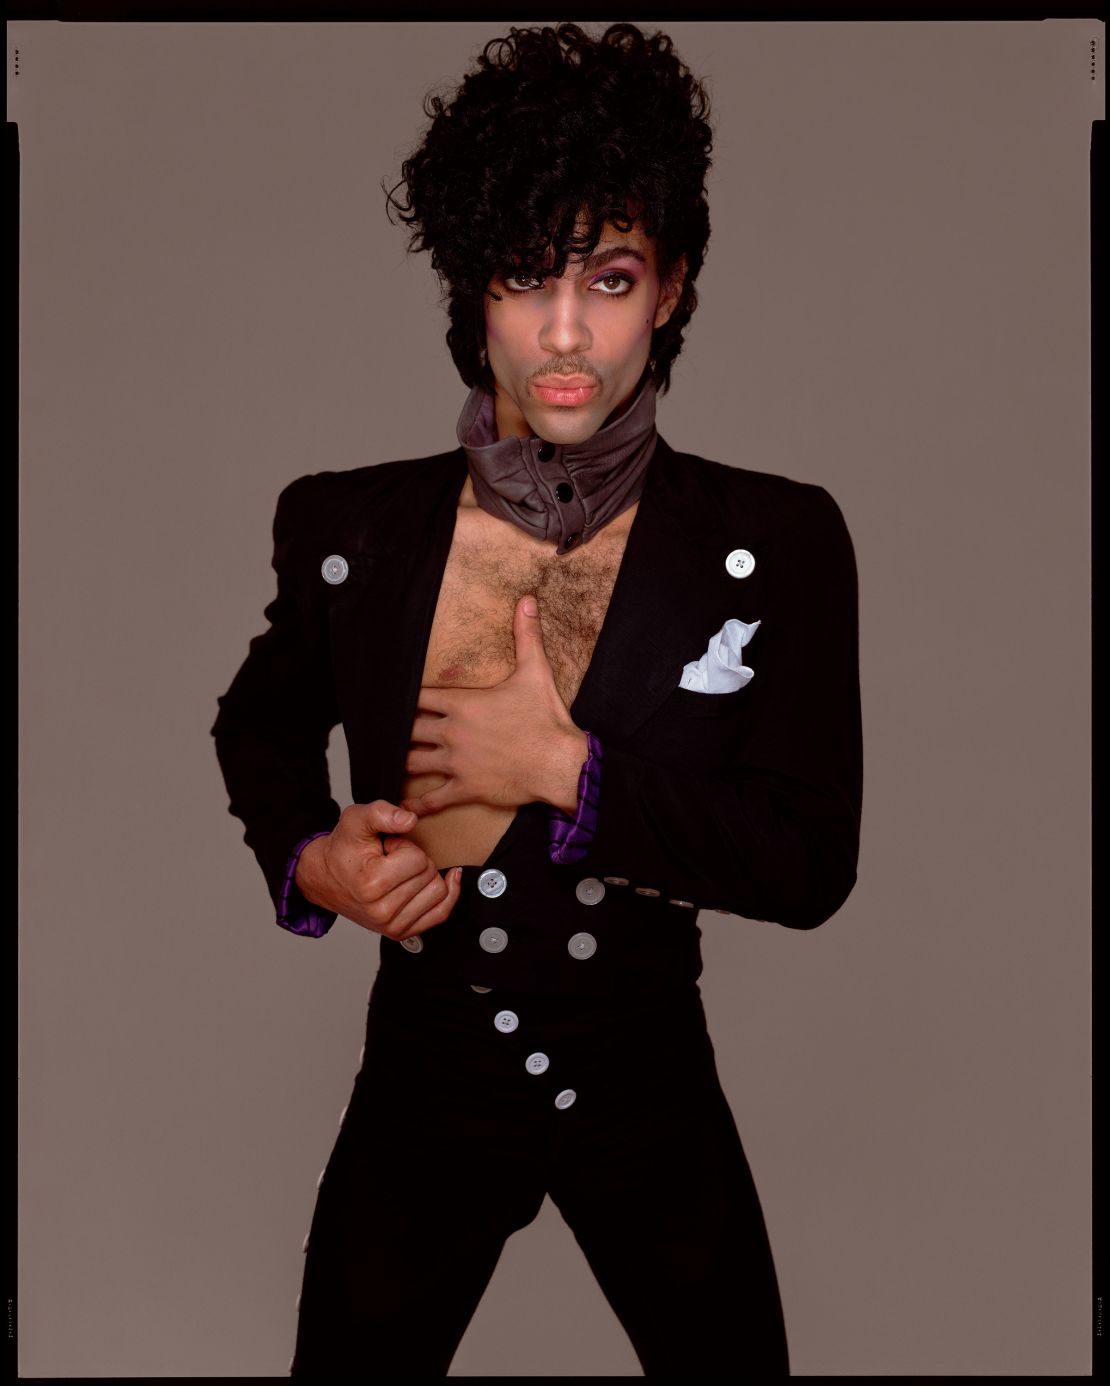 "A key element of Avedon's interests — and magic — was paradox," said Iman of a 1982 portrait Avedon took of Prince. "Here, with Prince, Avedon met the ideal embodiment. Prince was radiant, red-blooded male desire, just in reverse: not the usual swagger of splayed legs and tough, but searing allure, softness, and deceptive doe eyes, belying stone-cold intent... Avedon captures Prince not grasping his crotch but cradling his nipple. Prince's full lips are glazed with gloss and pout like a rogue baby doll. His hair rivals Godiva's yet beckons with virility."